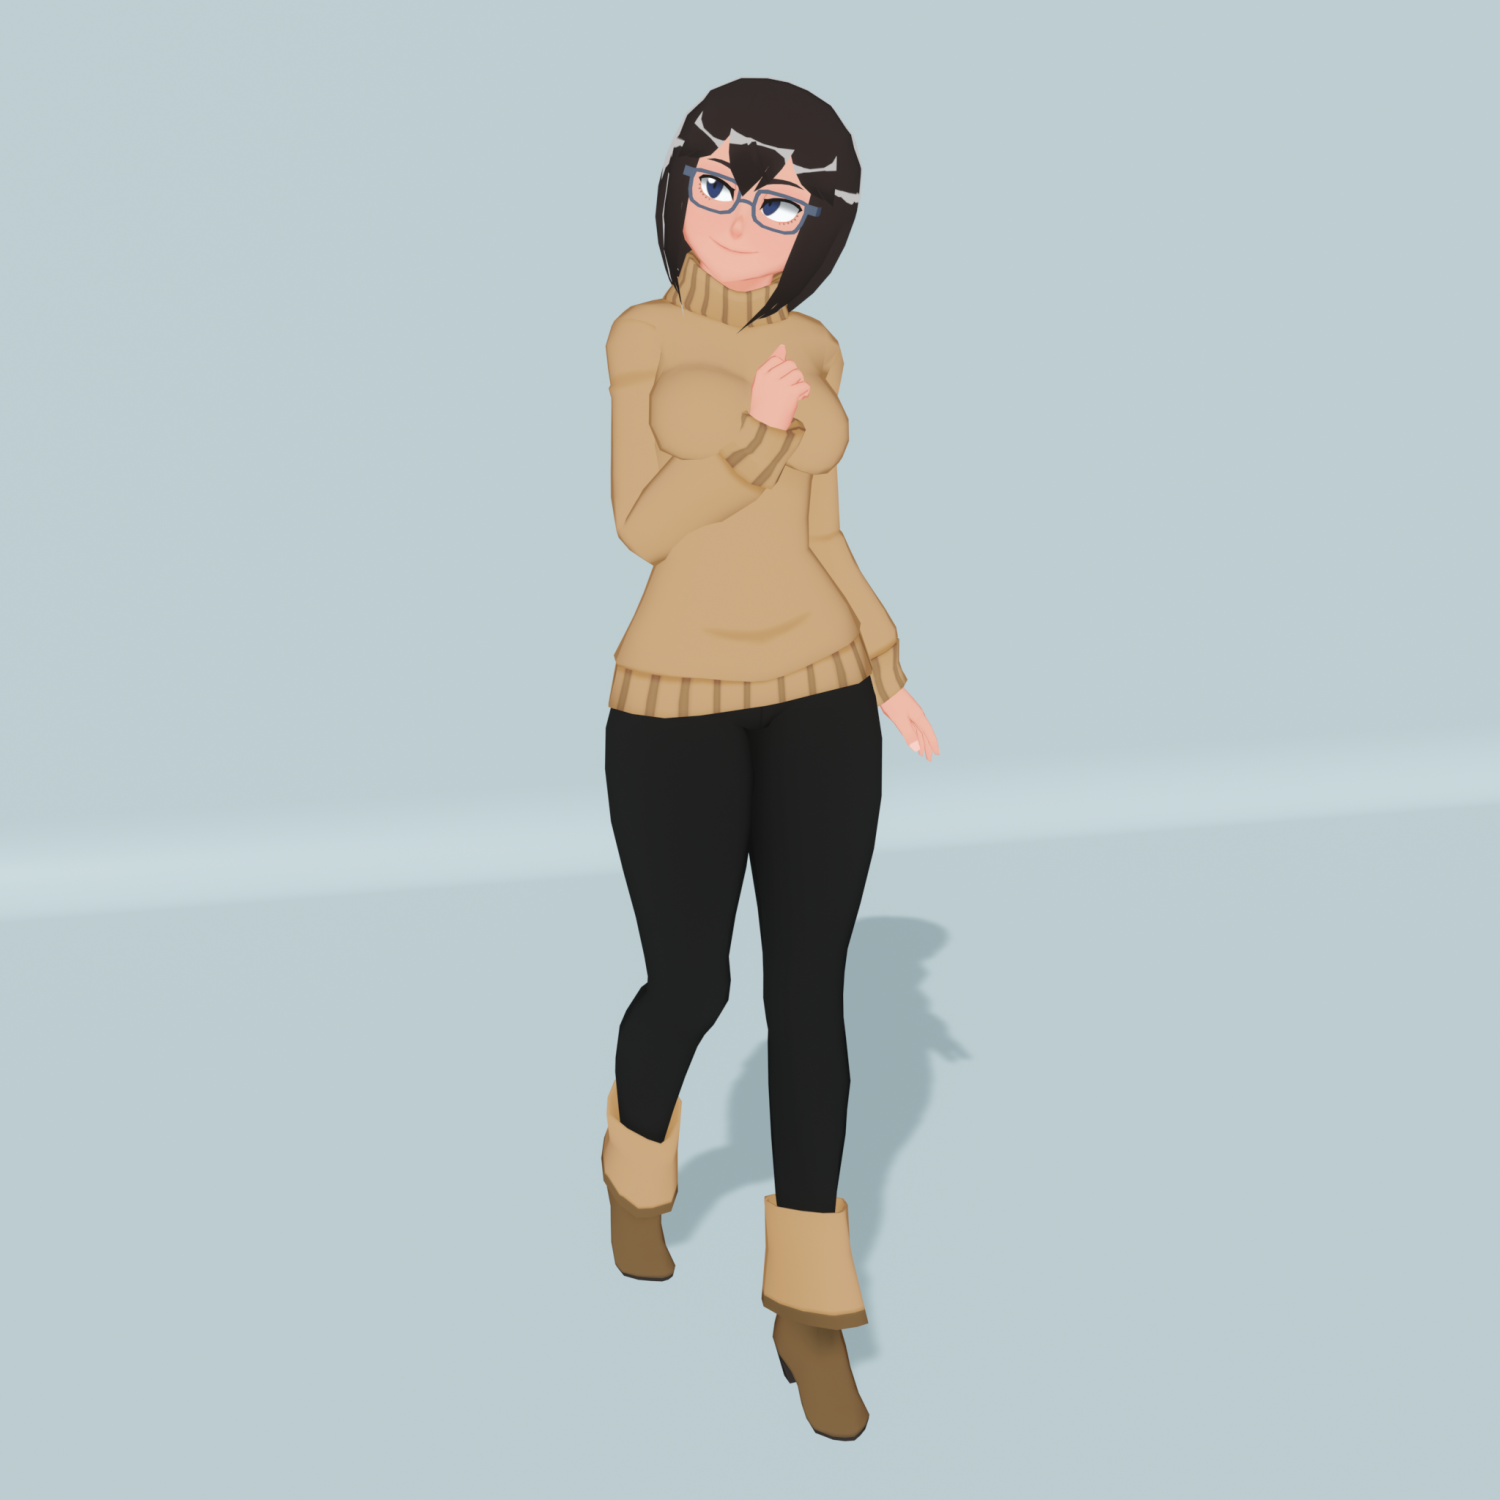 polly - low poly anime character Free 3D Model in Woman 3DExport